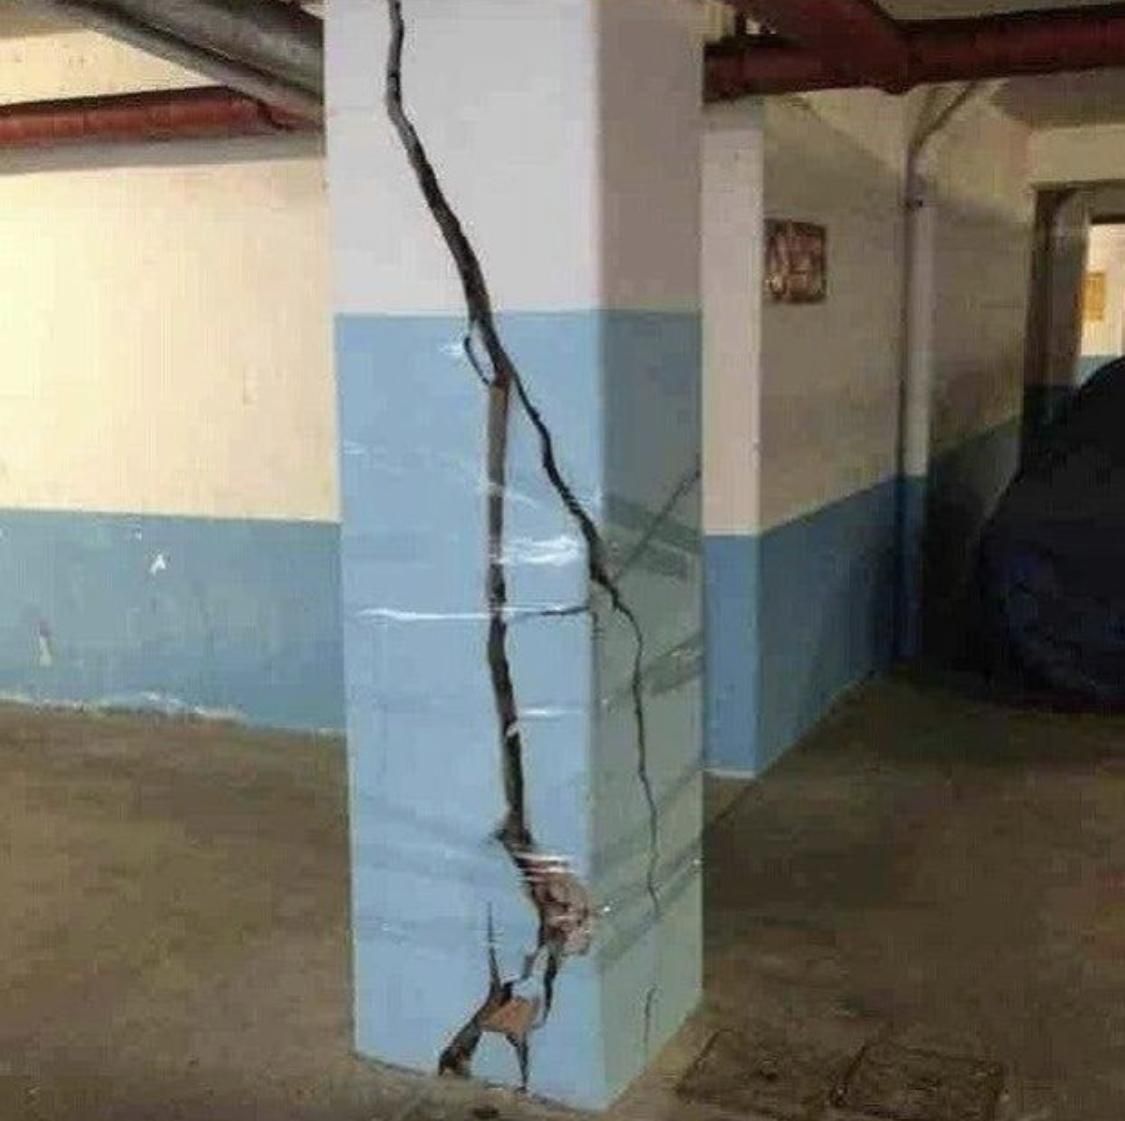 I hope in 2019 we have the same optimism as this guy had when he tried to save this pillar